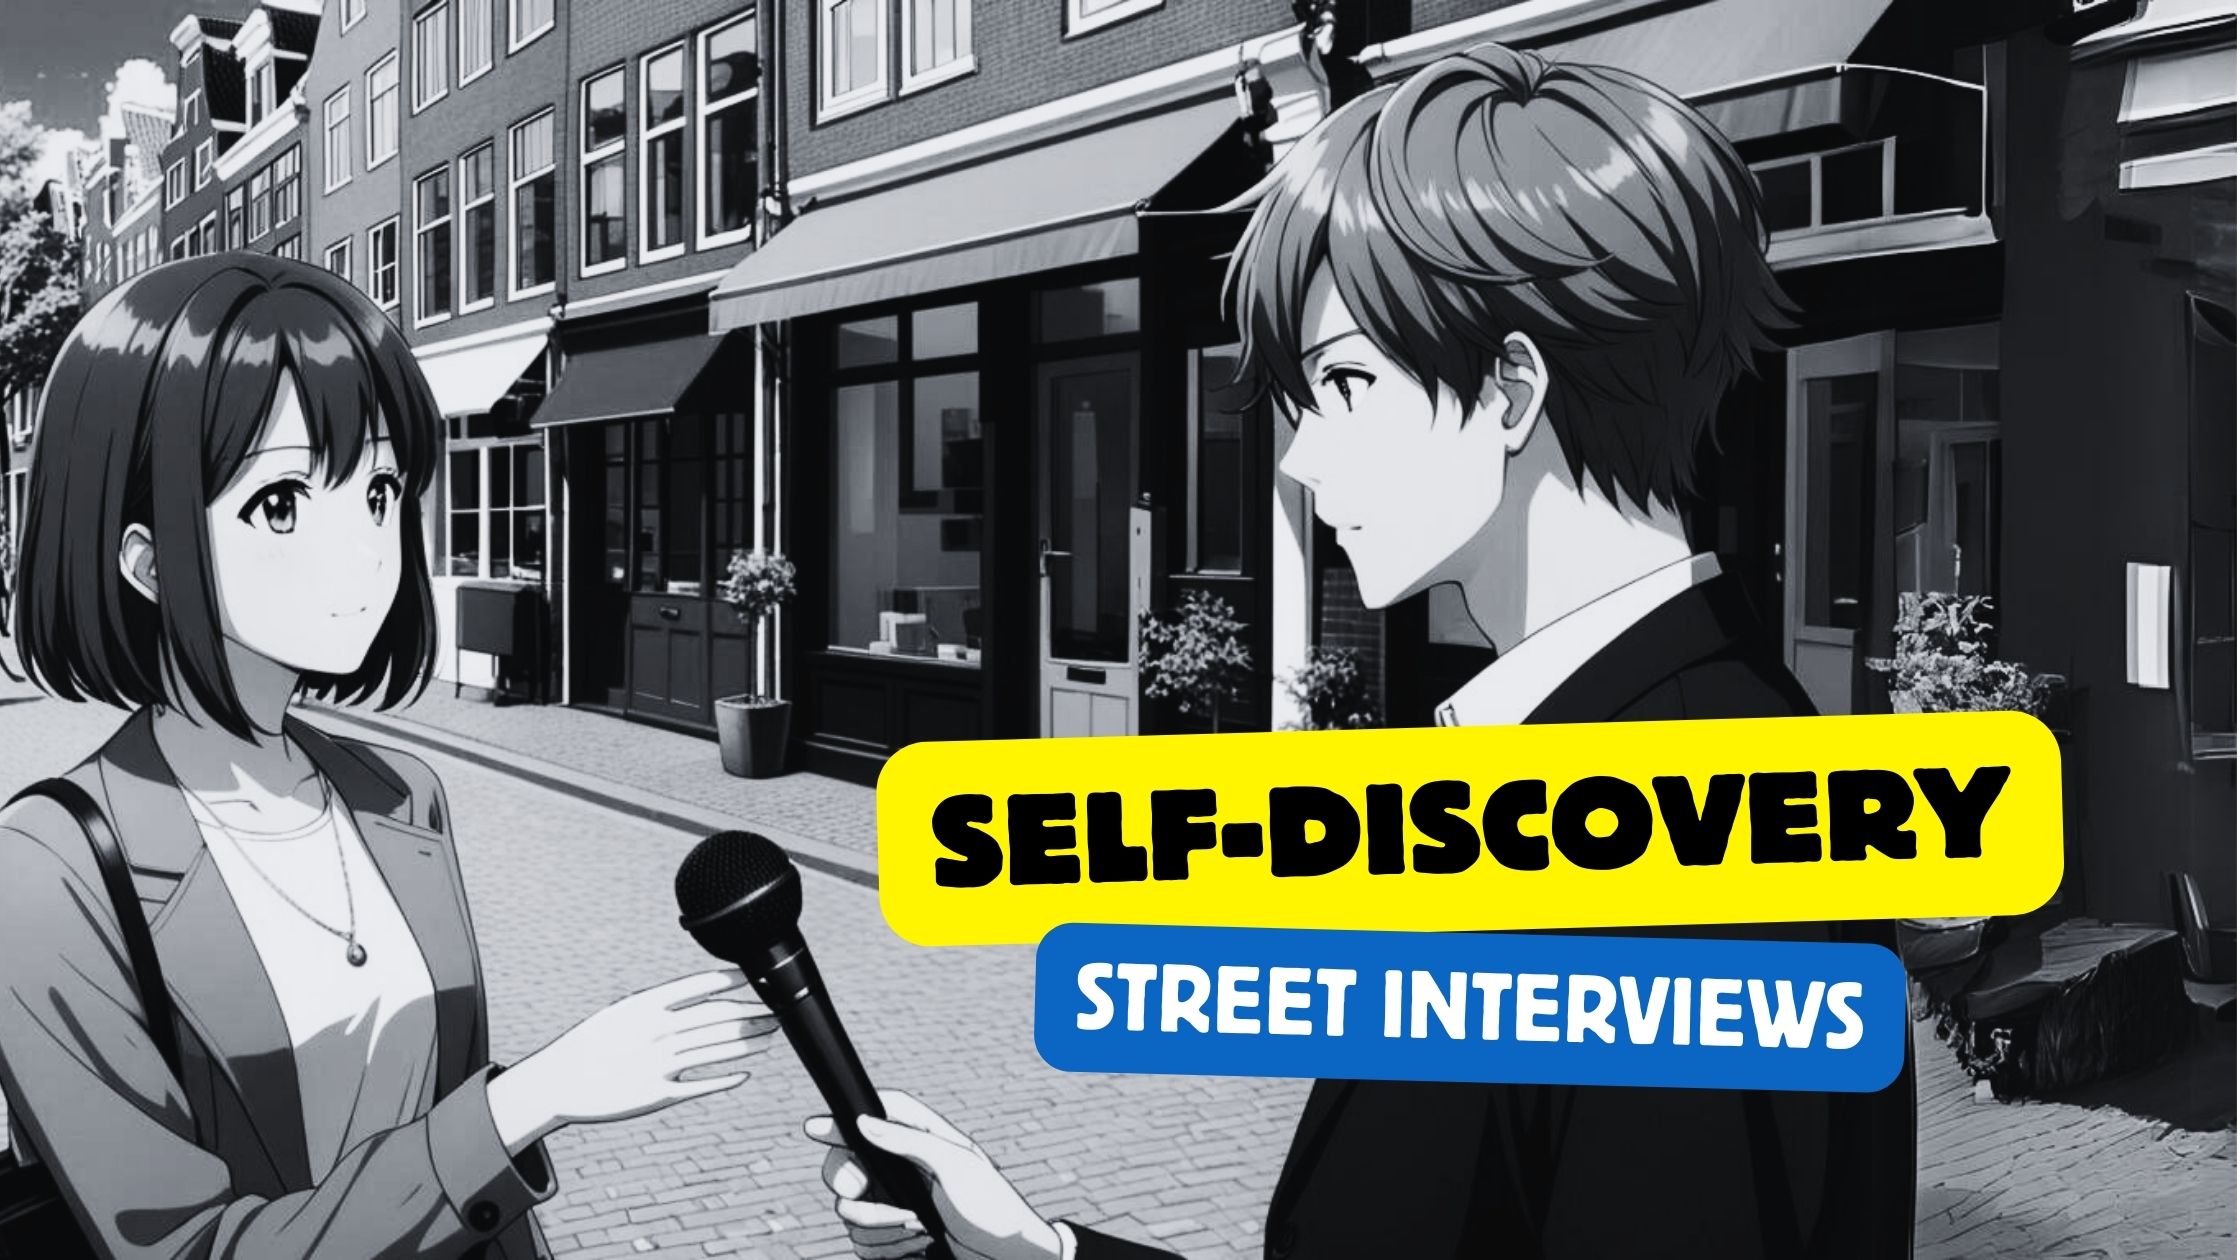 self-discovery street interviews